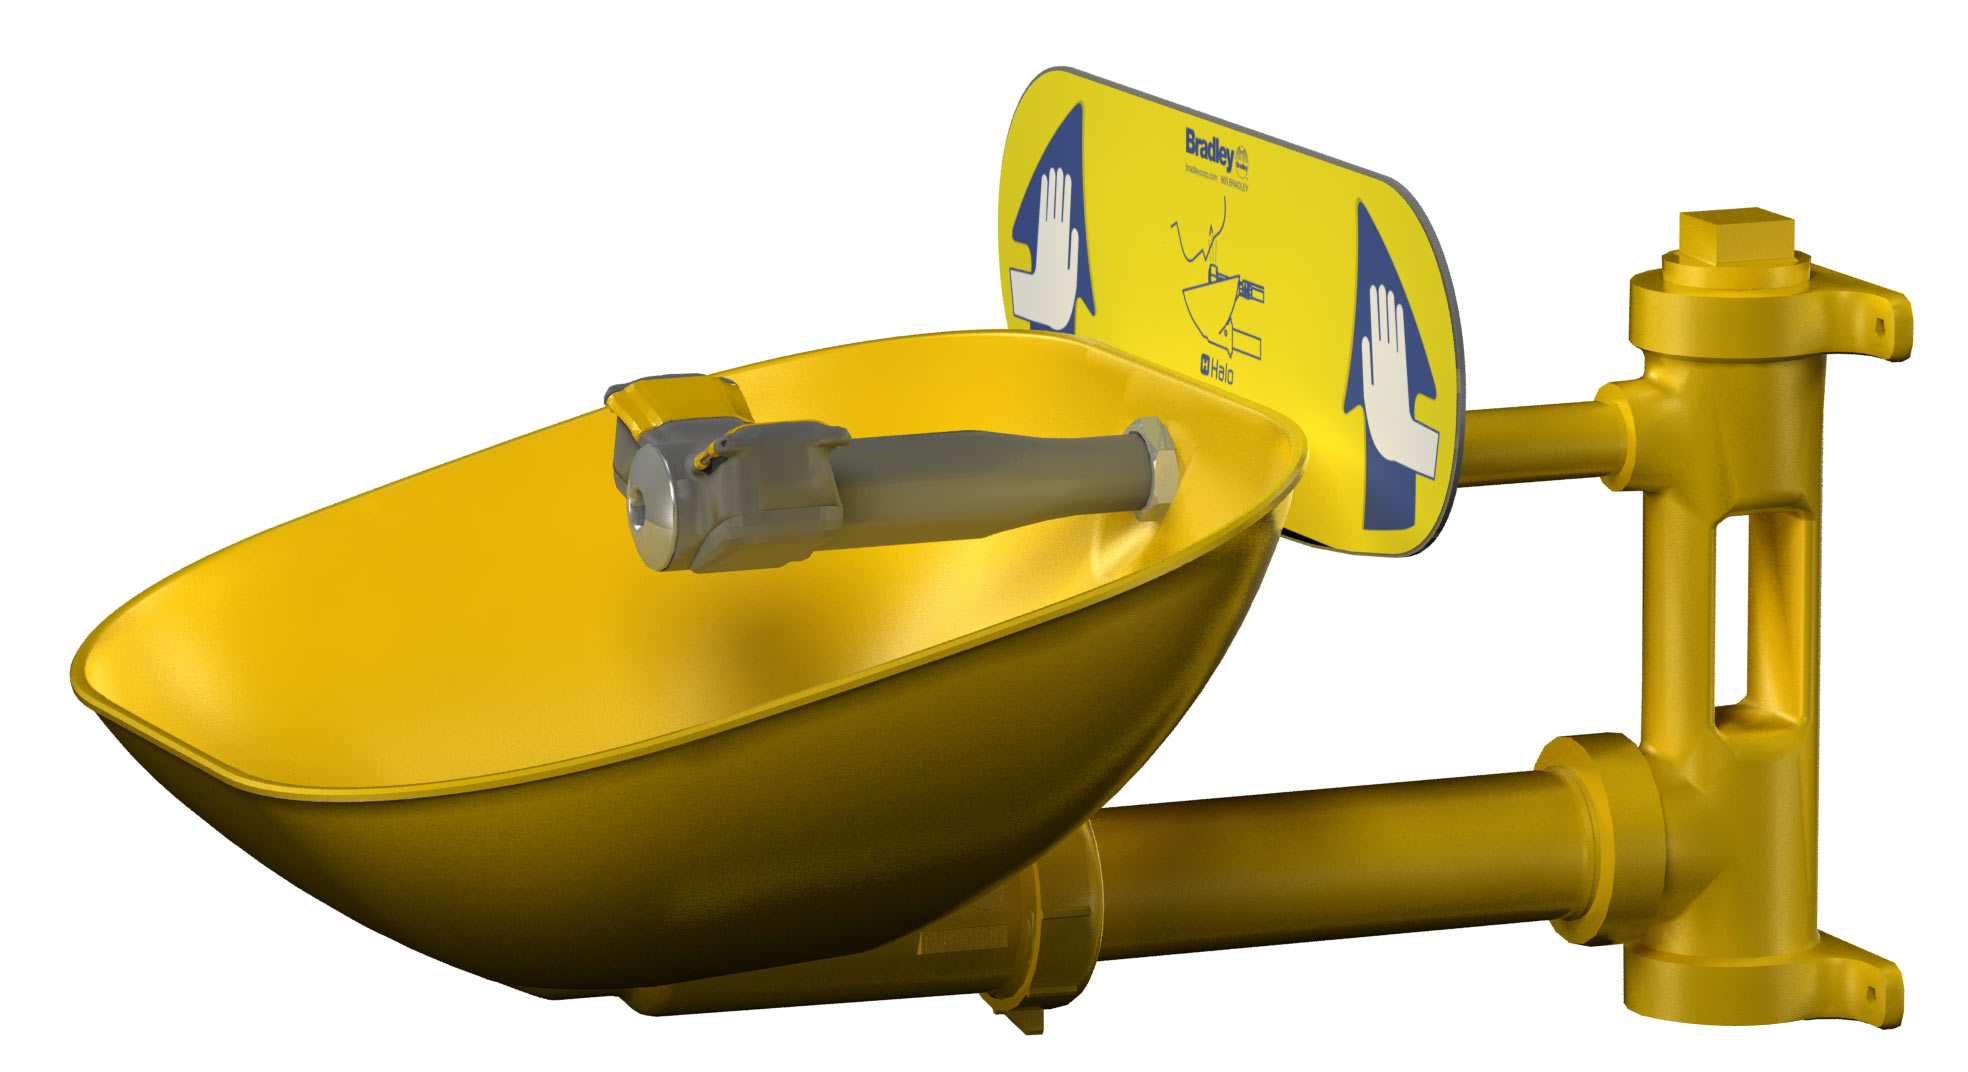 Wall-Mounted Halo Eyewash with yellow impact-resistant plastic bowl and hand activation - Model S19224EW